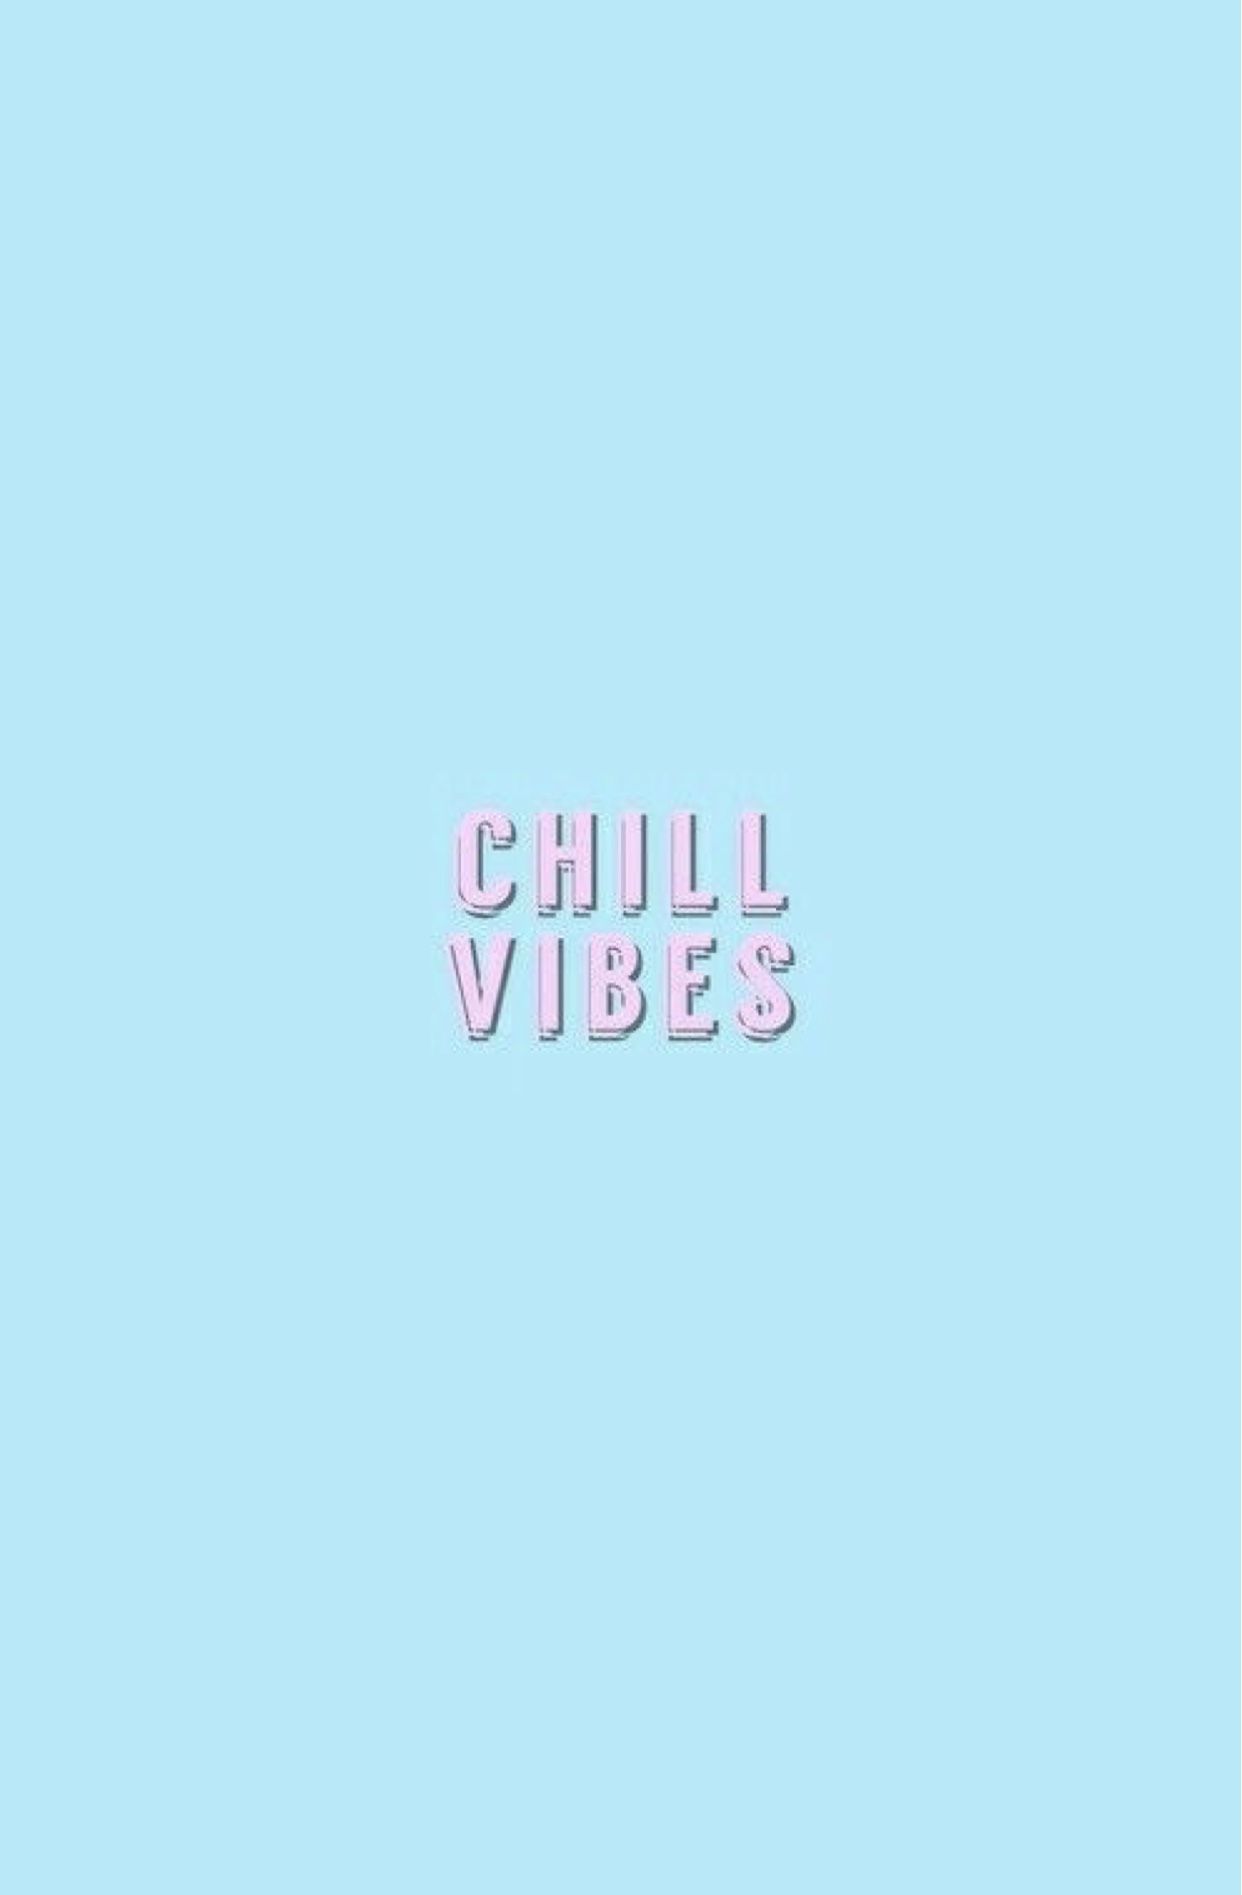 100 Chill Aesthetic Wallpapers  Wallpaperscom